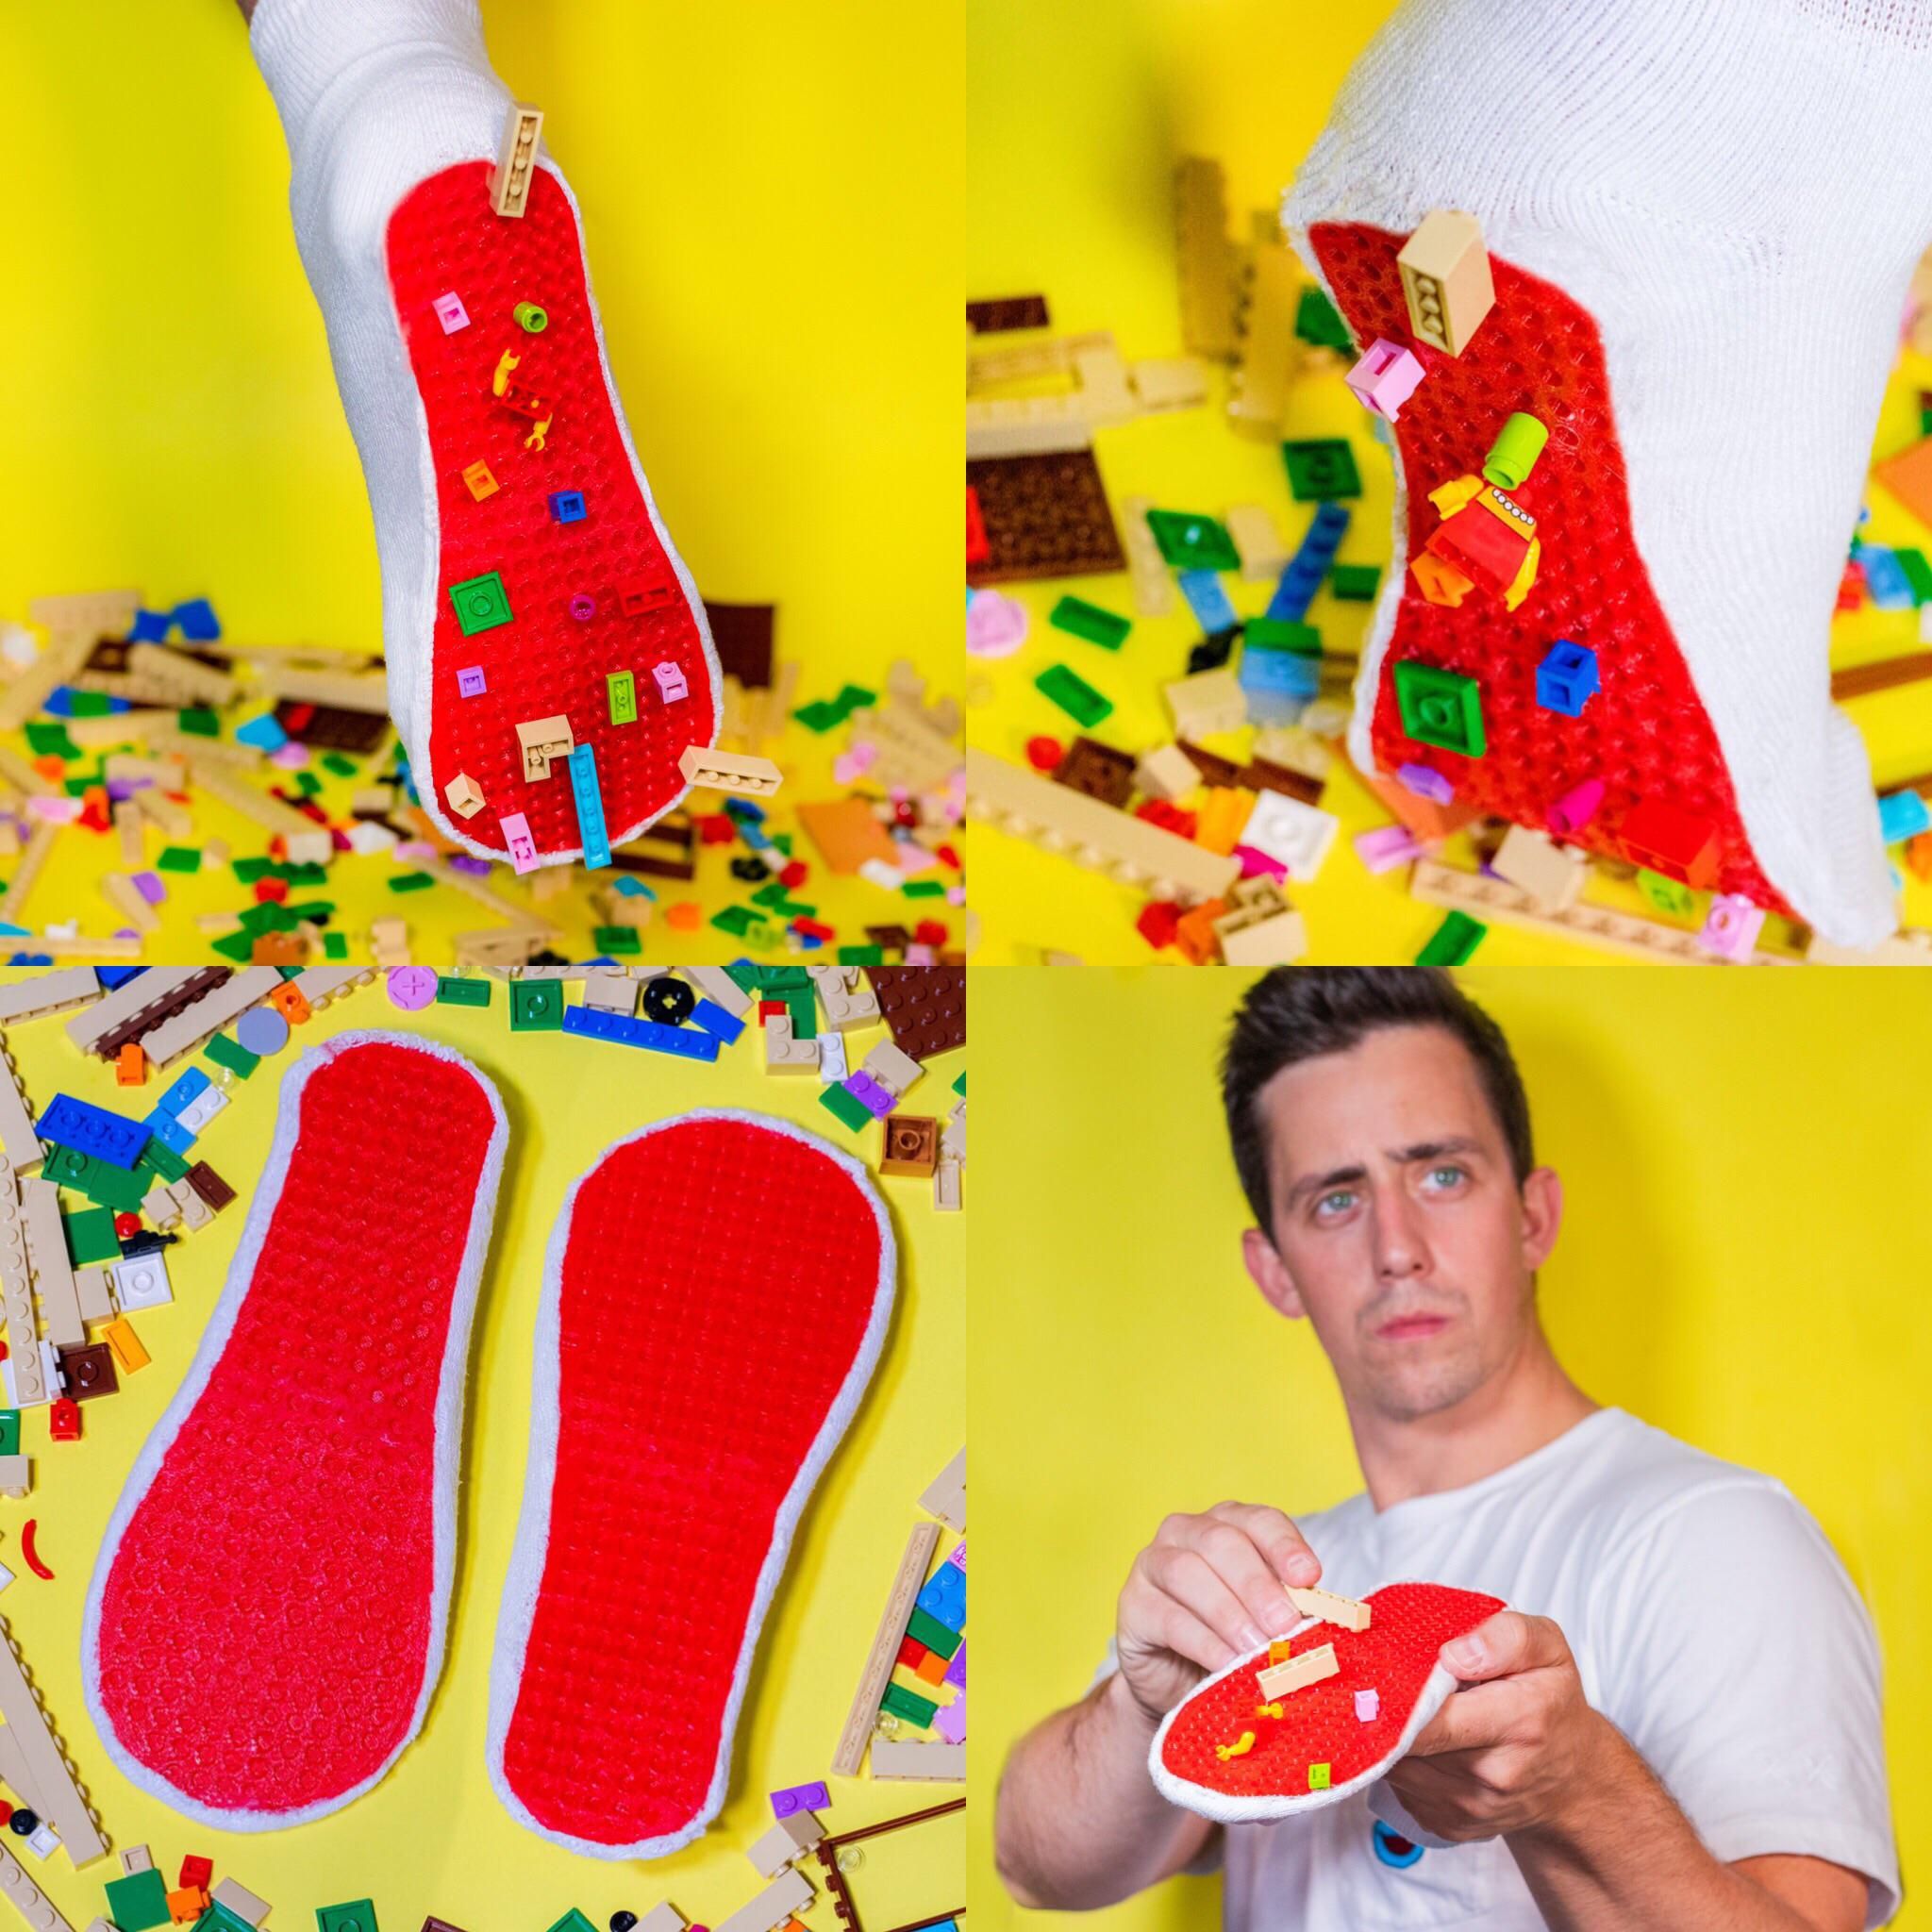 Hate stepping on Legos? I made a pair of lego socks so simply pick them up as you go, pain-free!